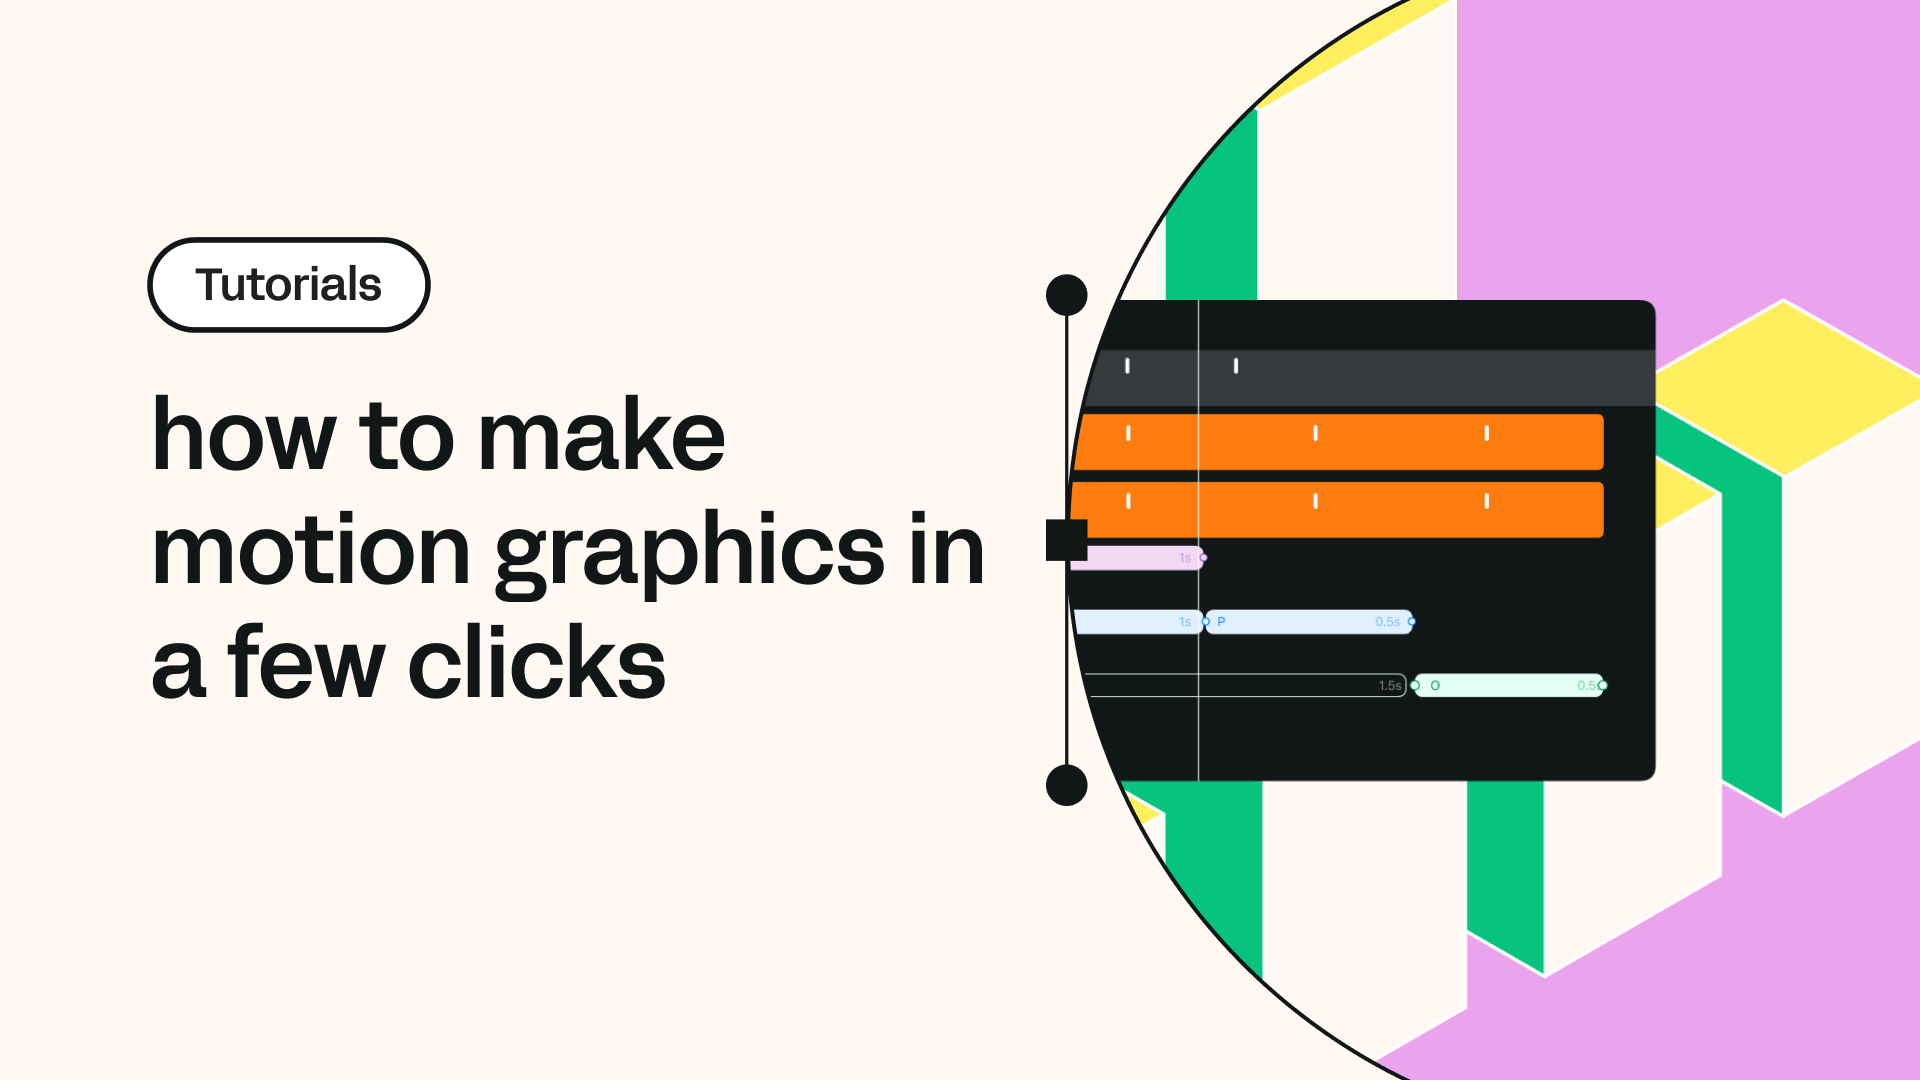 How to make motion graphics in a few clicks